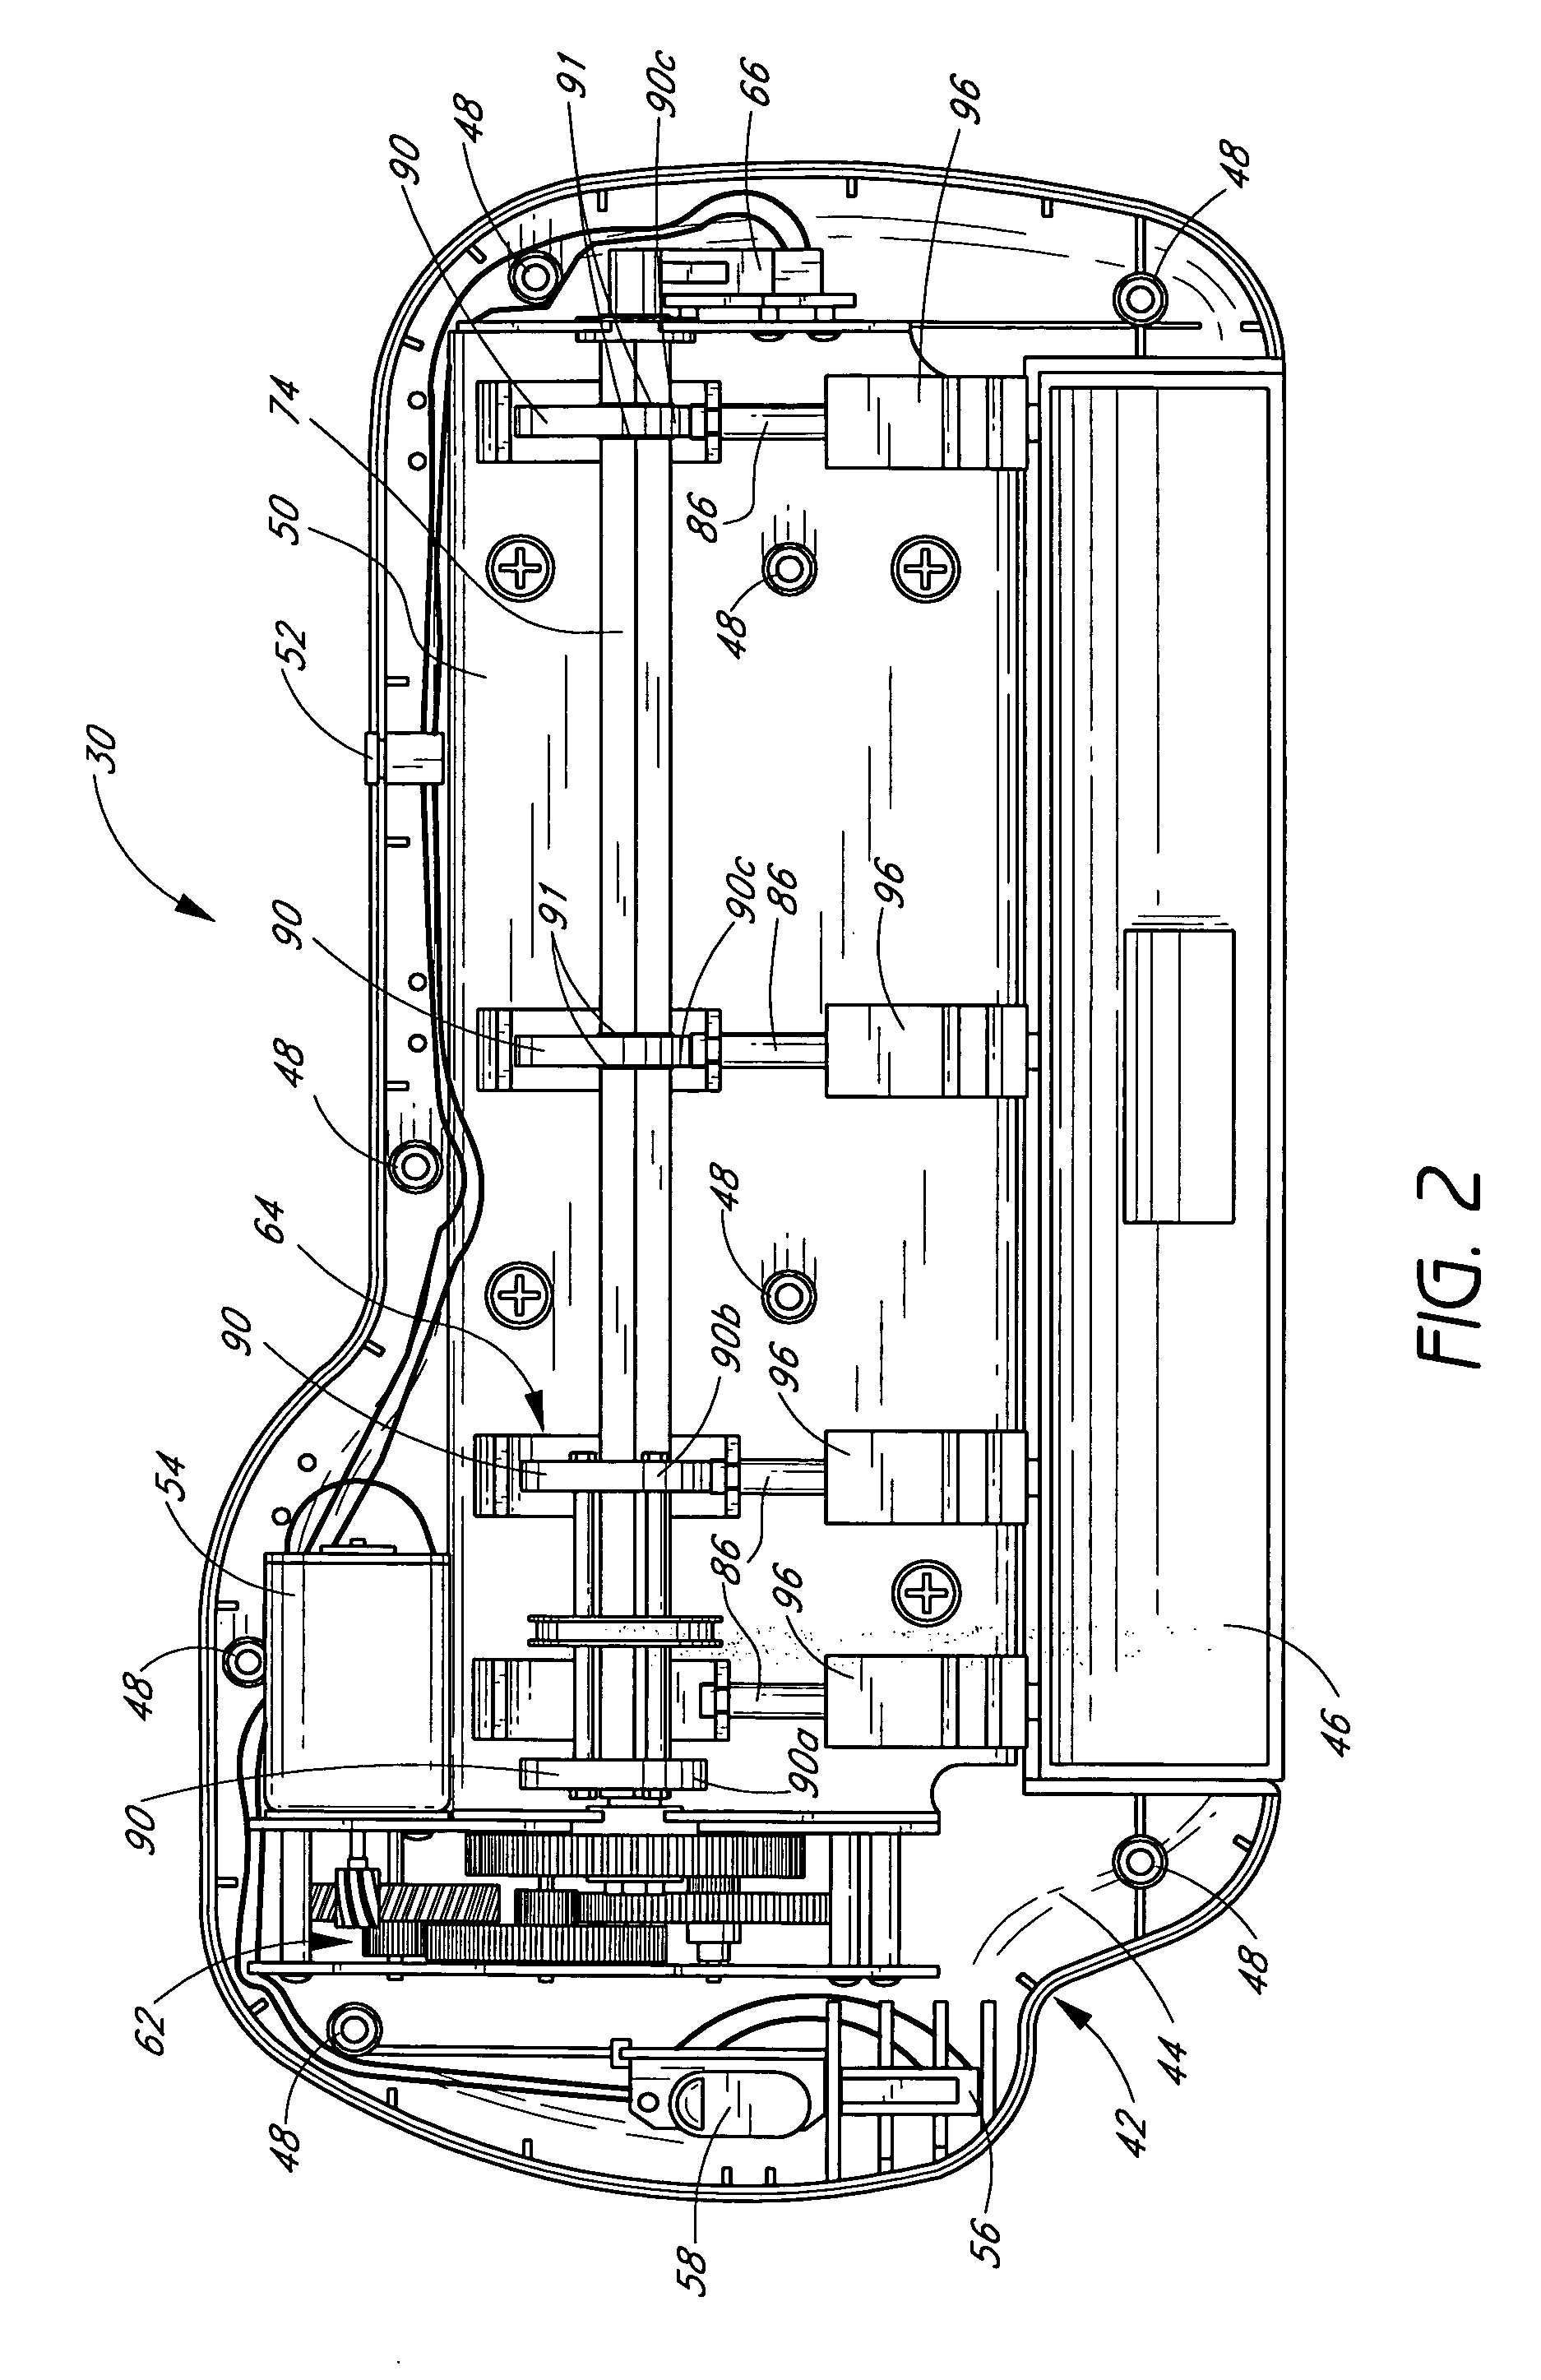 Automatic hole punching devices and methods